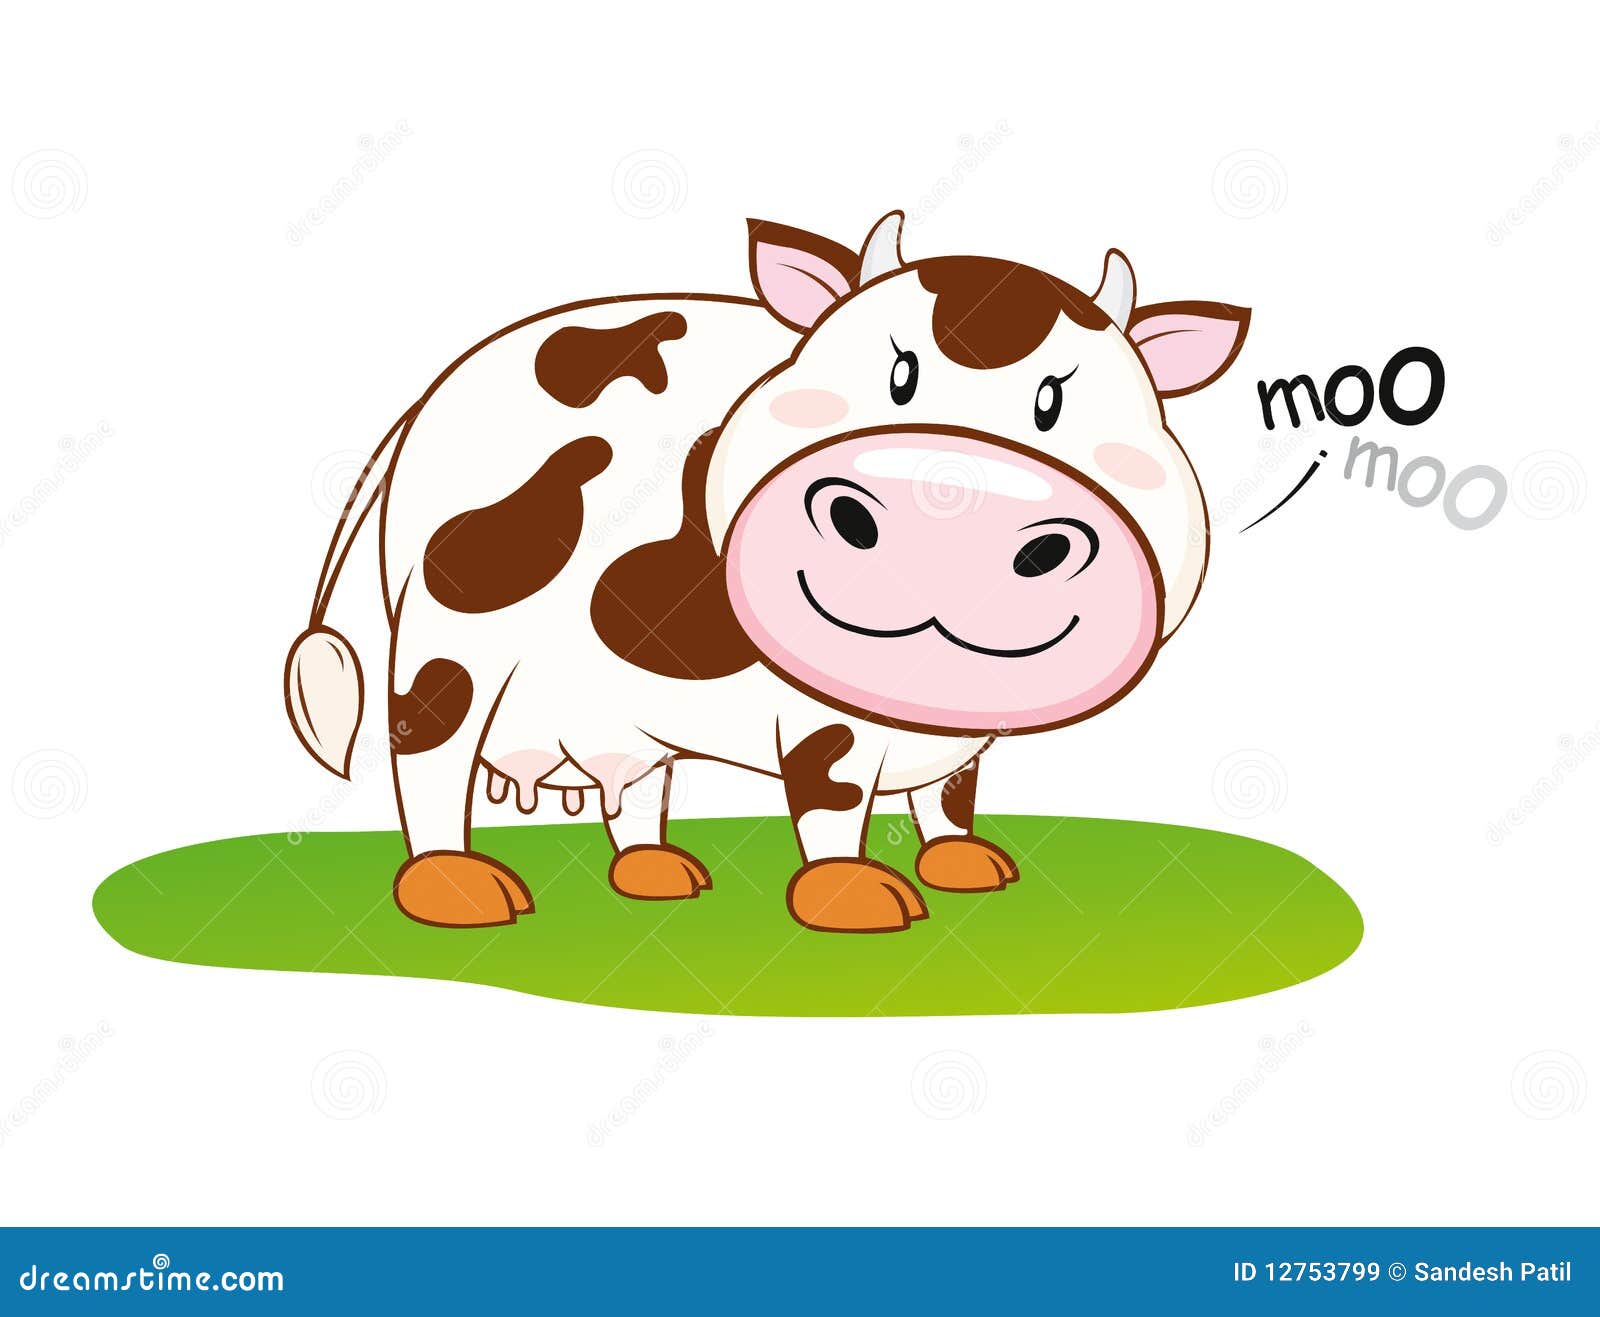 cow moo clipart - photo #37